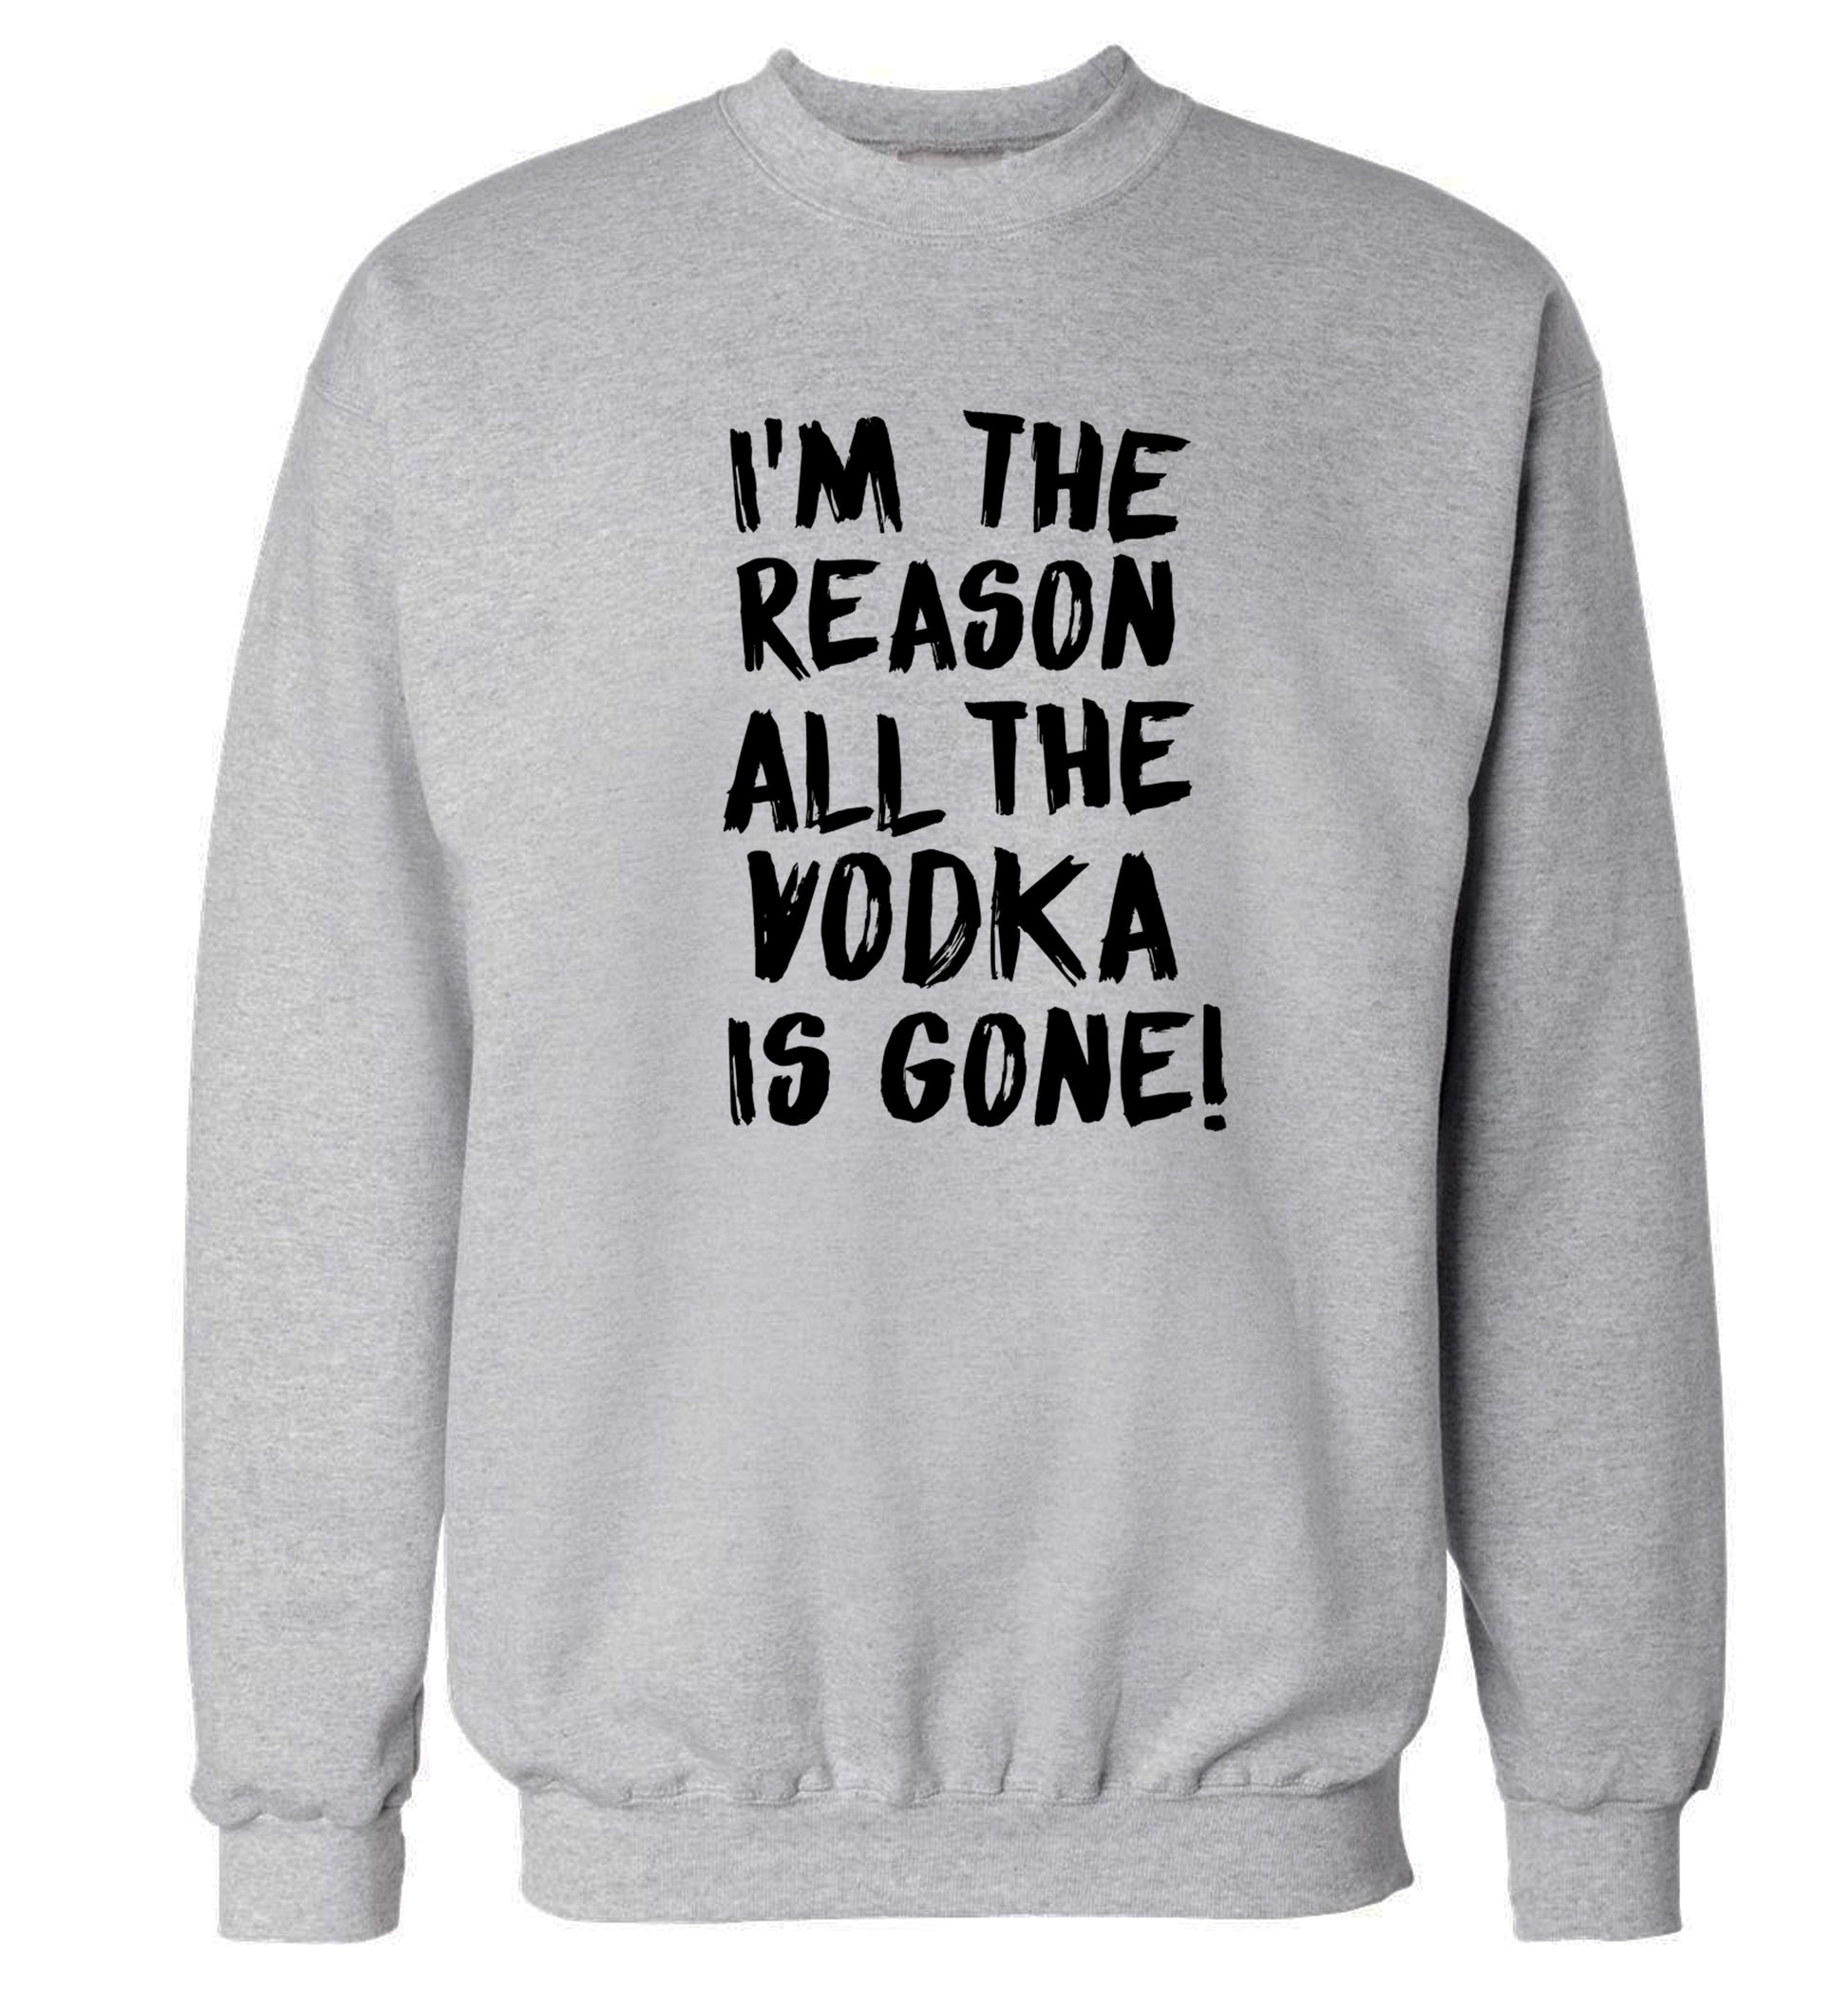 I'm the reason all the tequila is gone Adult's unisex grey Sweater 2XL